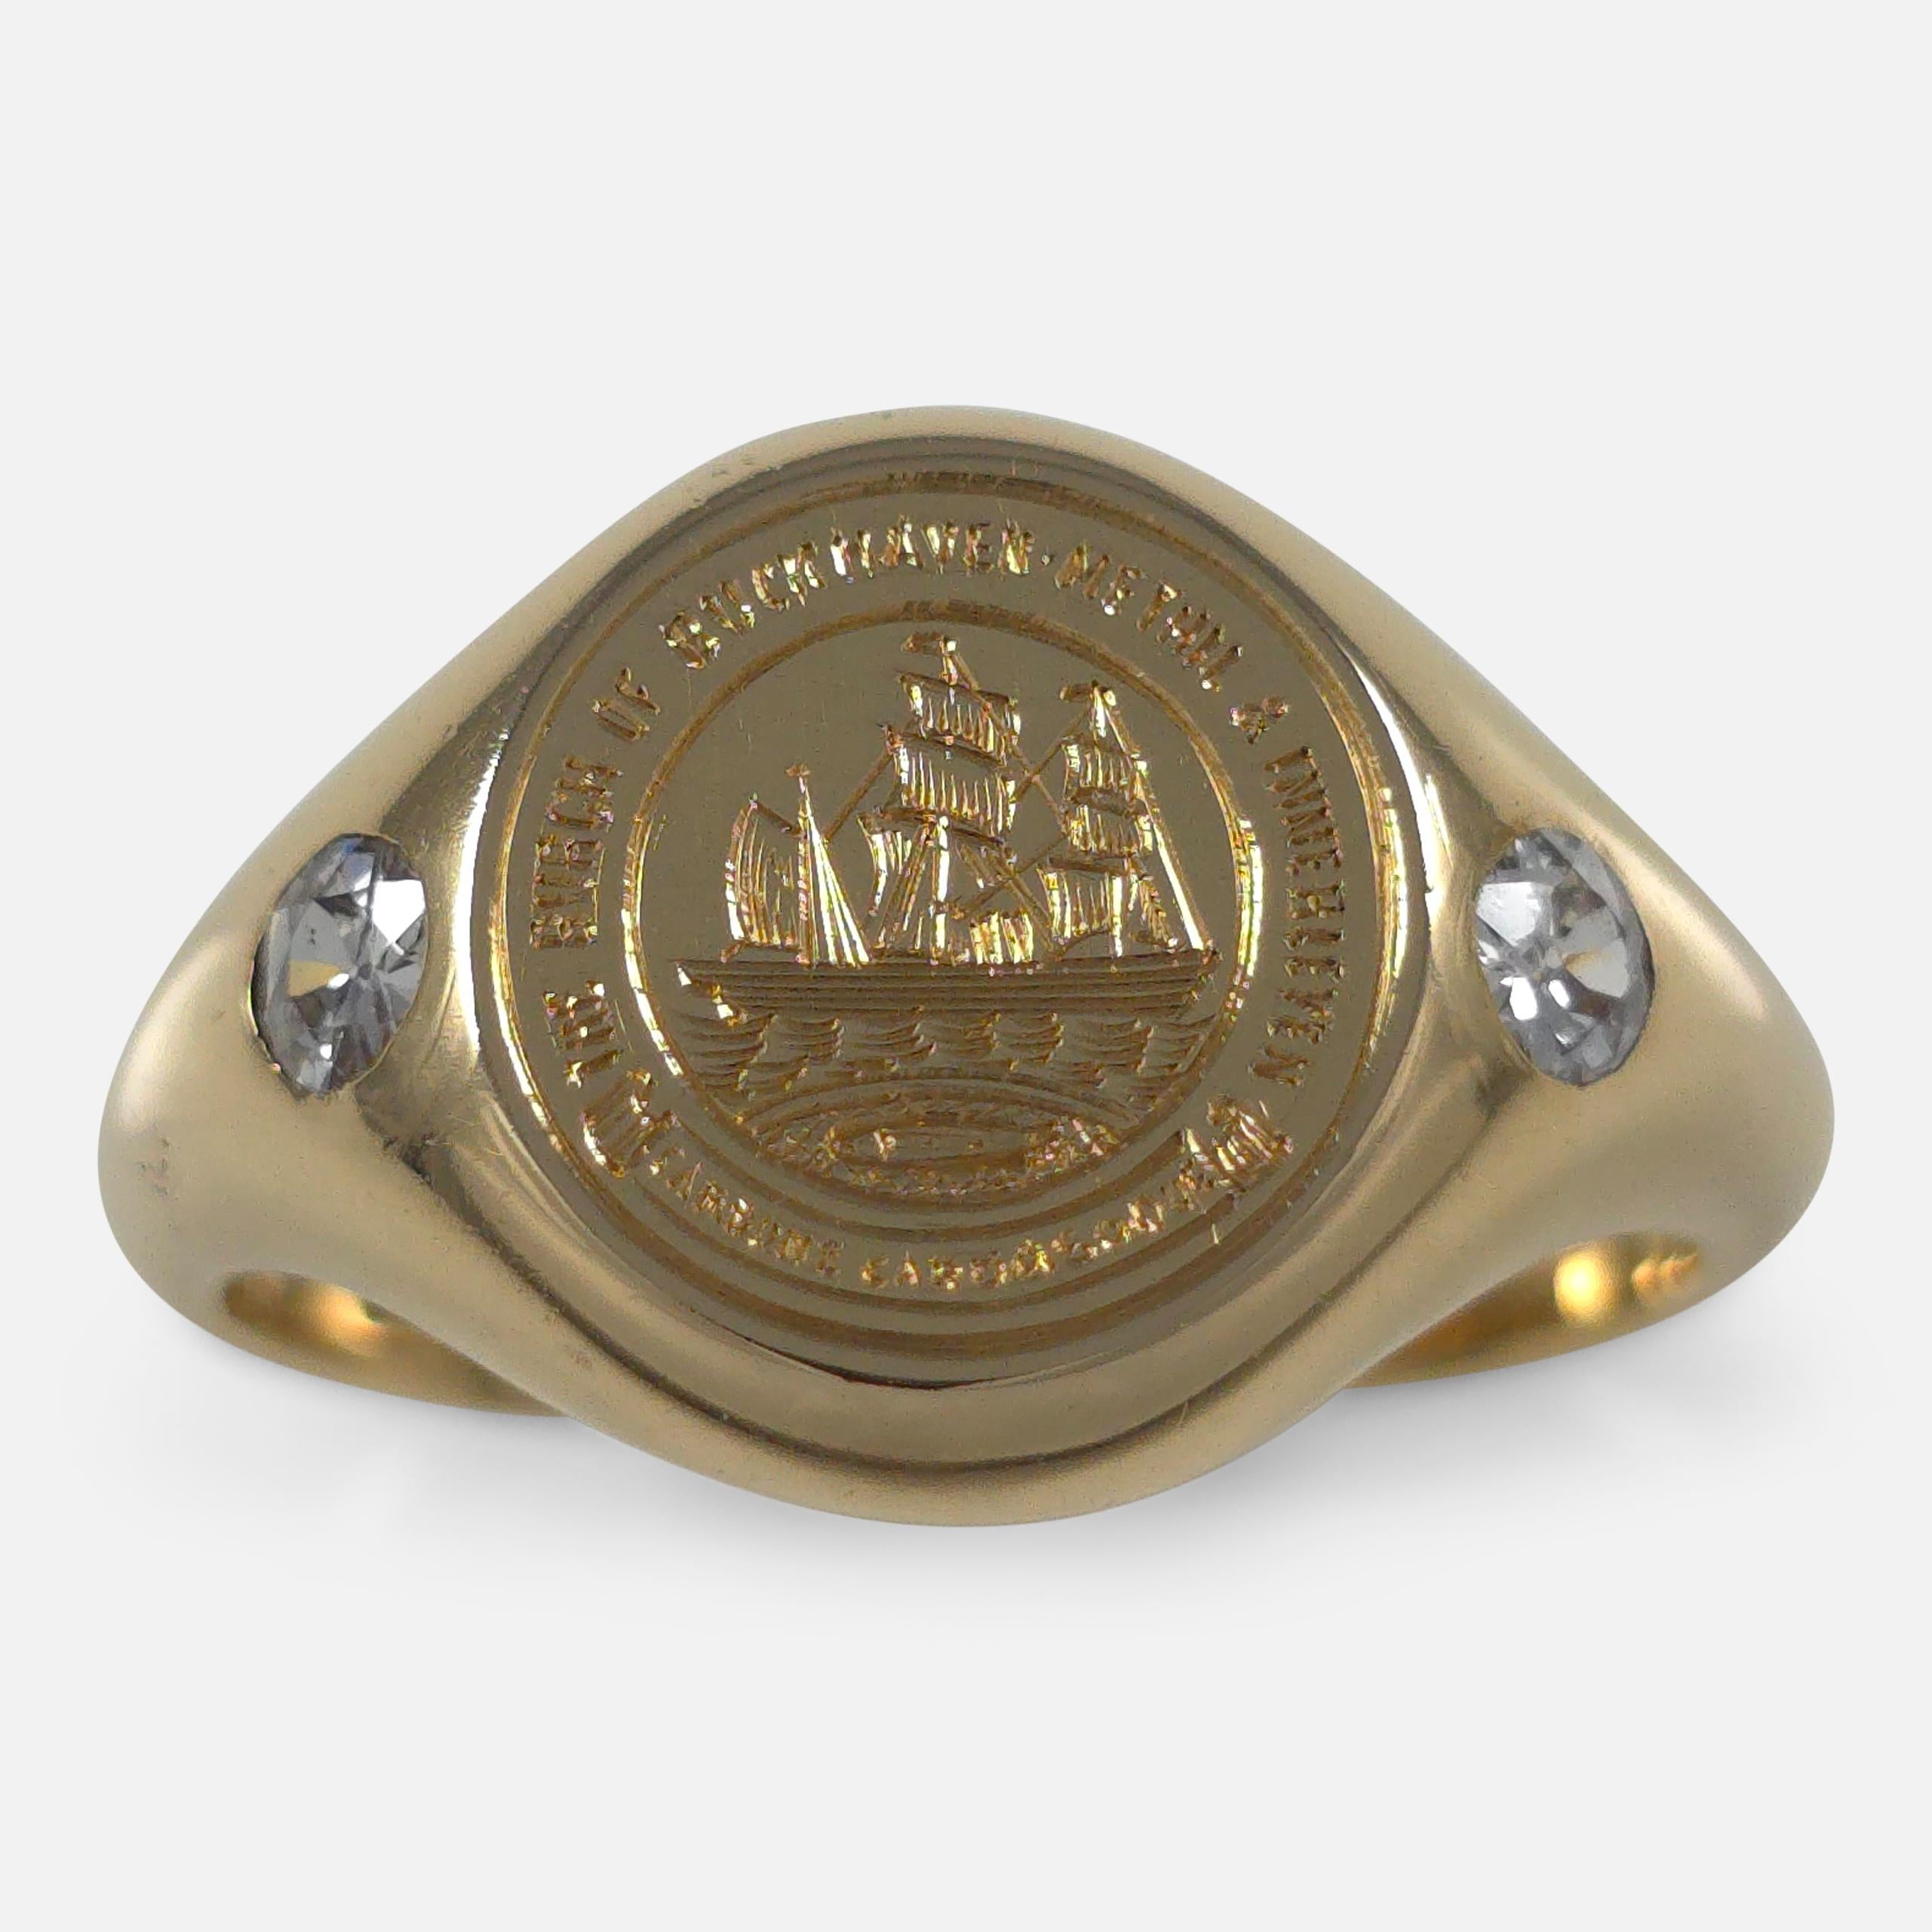 An 18ct yellow gold signet ring, featuring the intaglio arms of The Burgh of Buckhaven, Methil and Innerleven (Scotland). The ring is adorned with transitional cut diamonds totaling approximately 0.28ct and is presented in its original ring box.

•